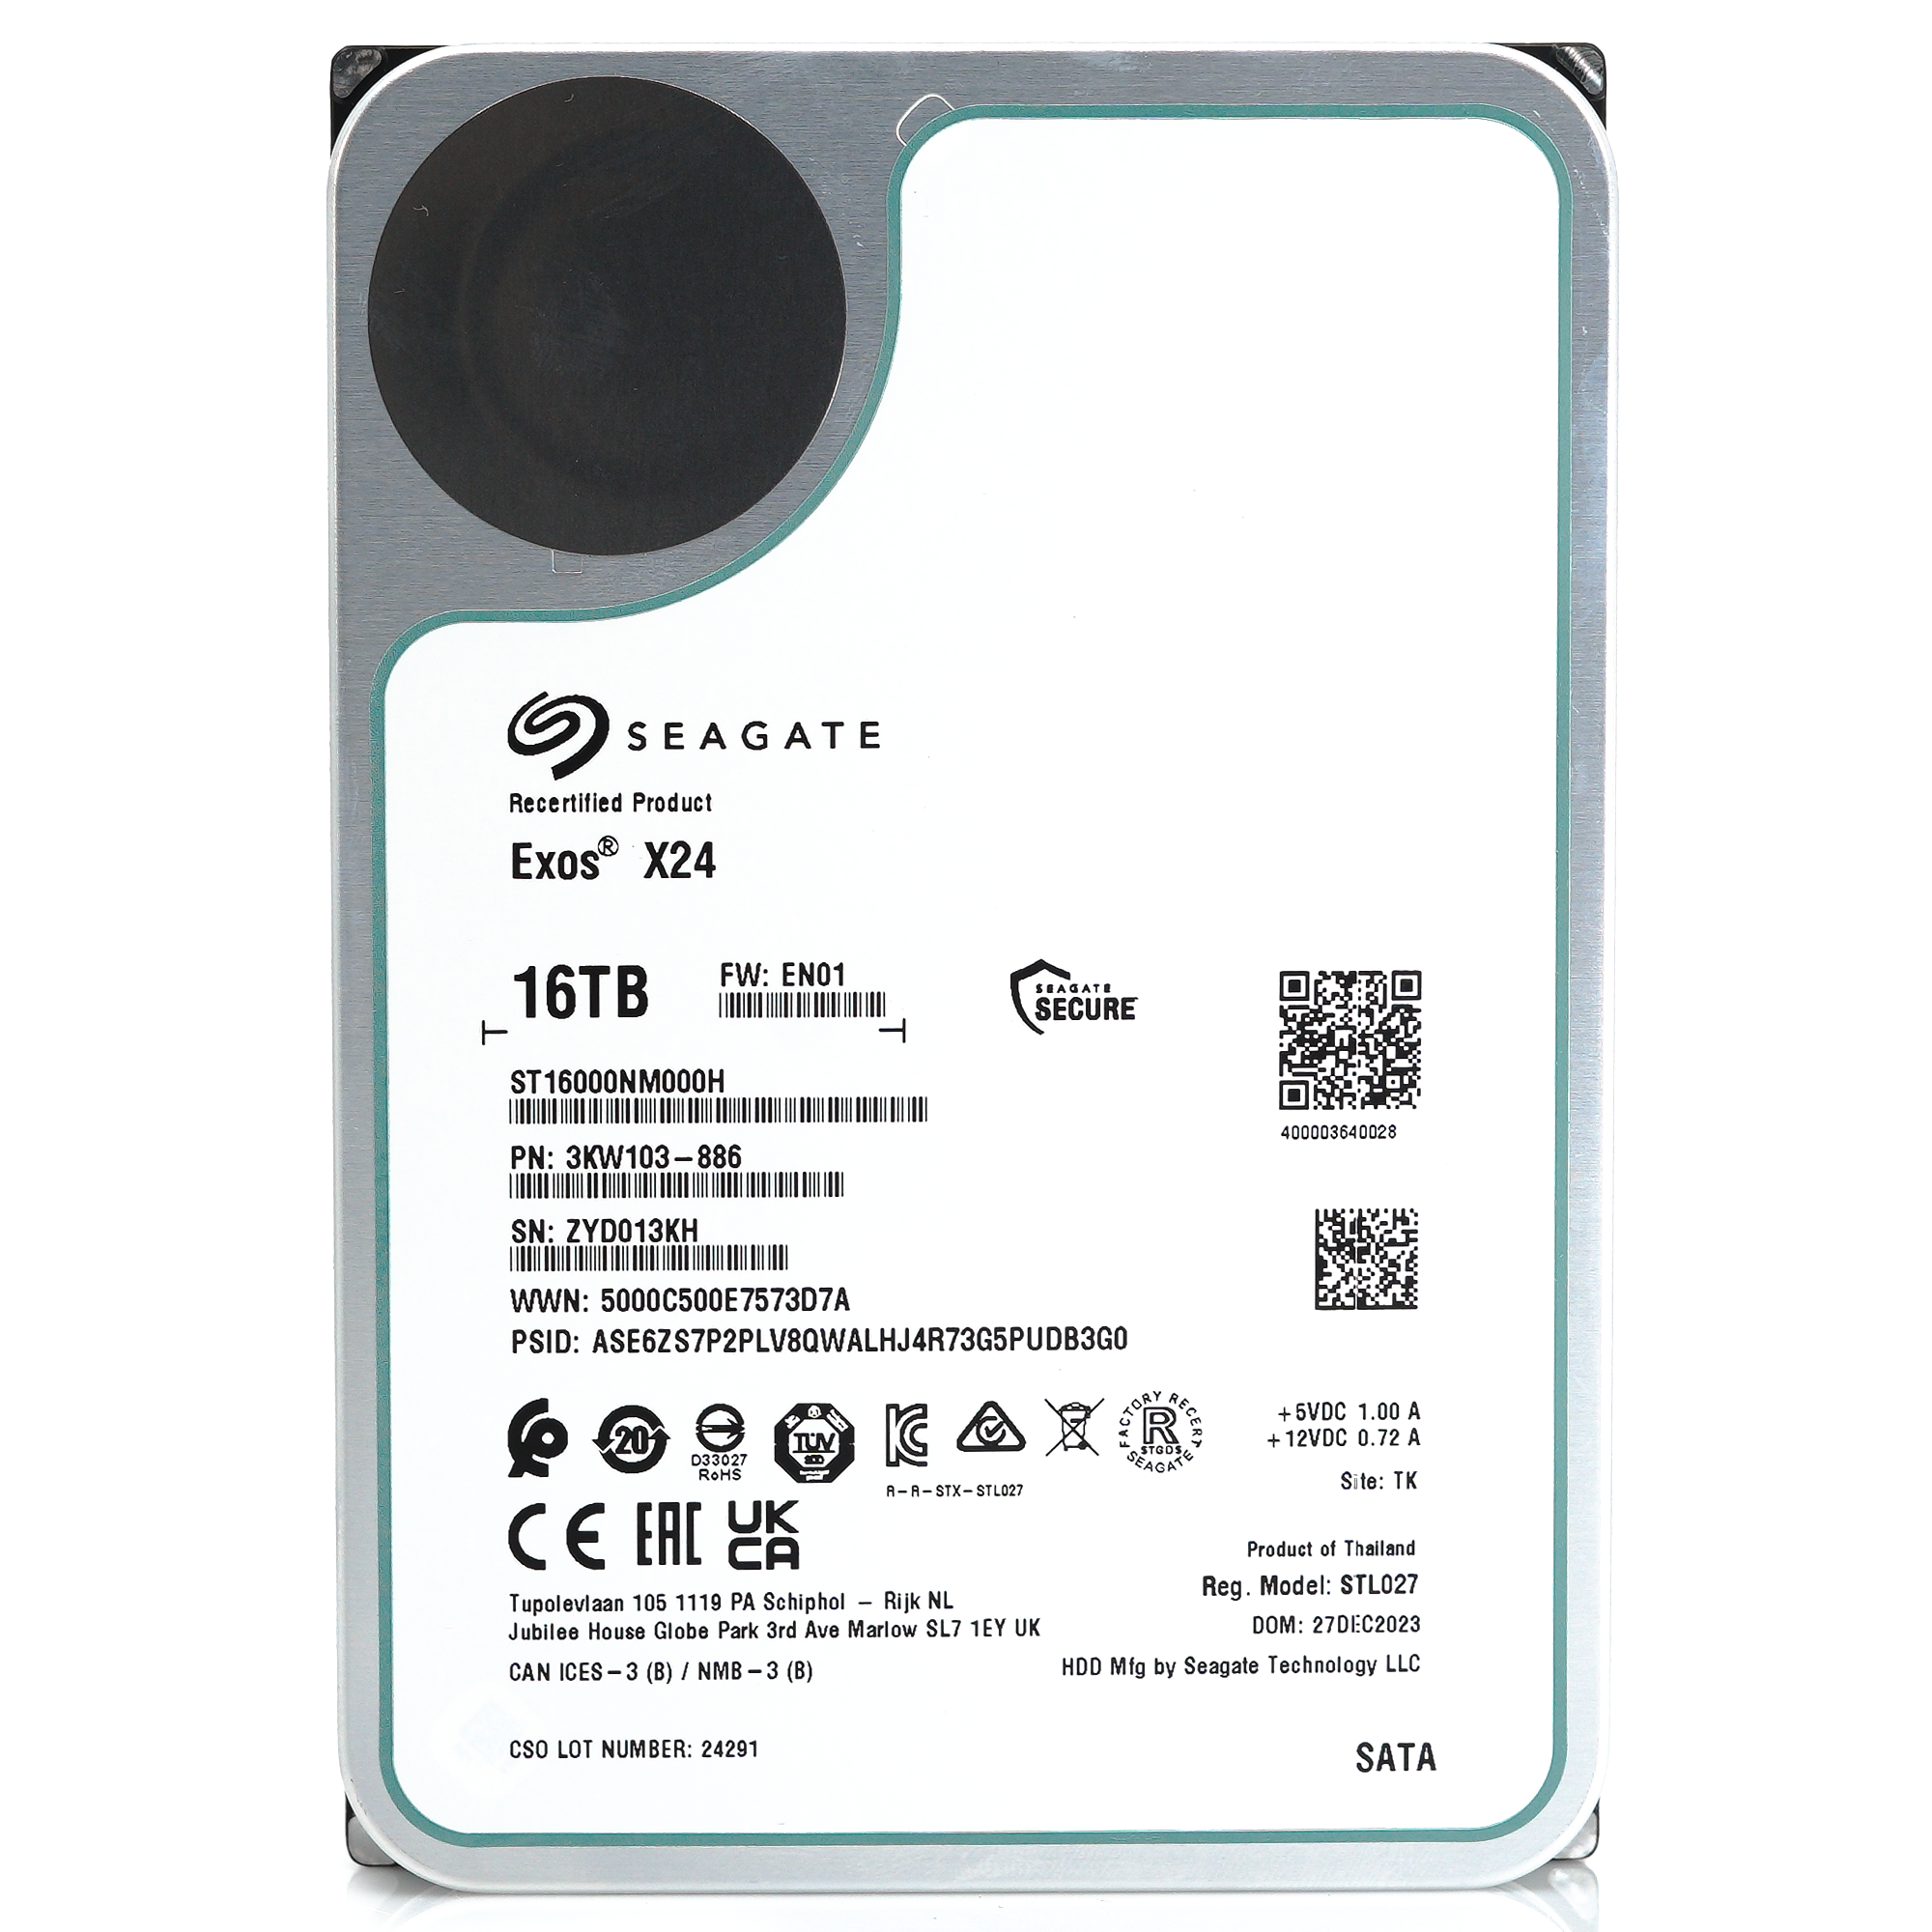 Seagate Exos X24 ST16000NM000H 16TB 7.2K RPM SATA 6Gb/s 512e 3.5in Recertified Hard Drive - Front View